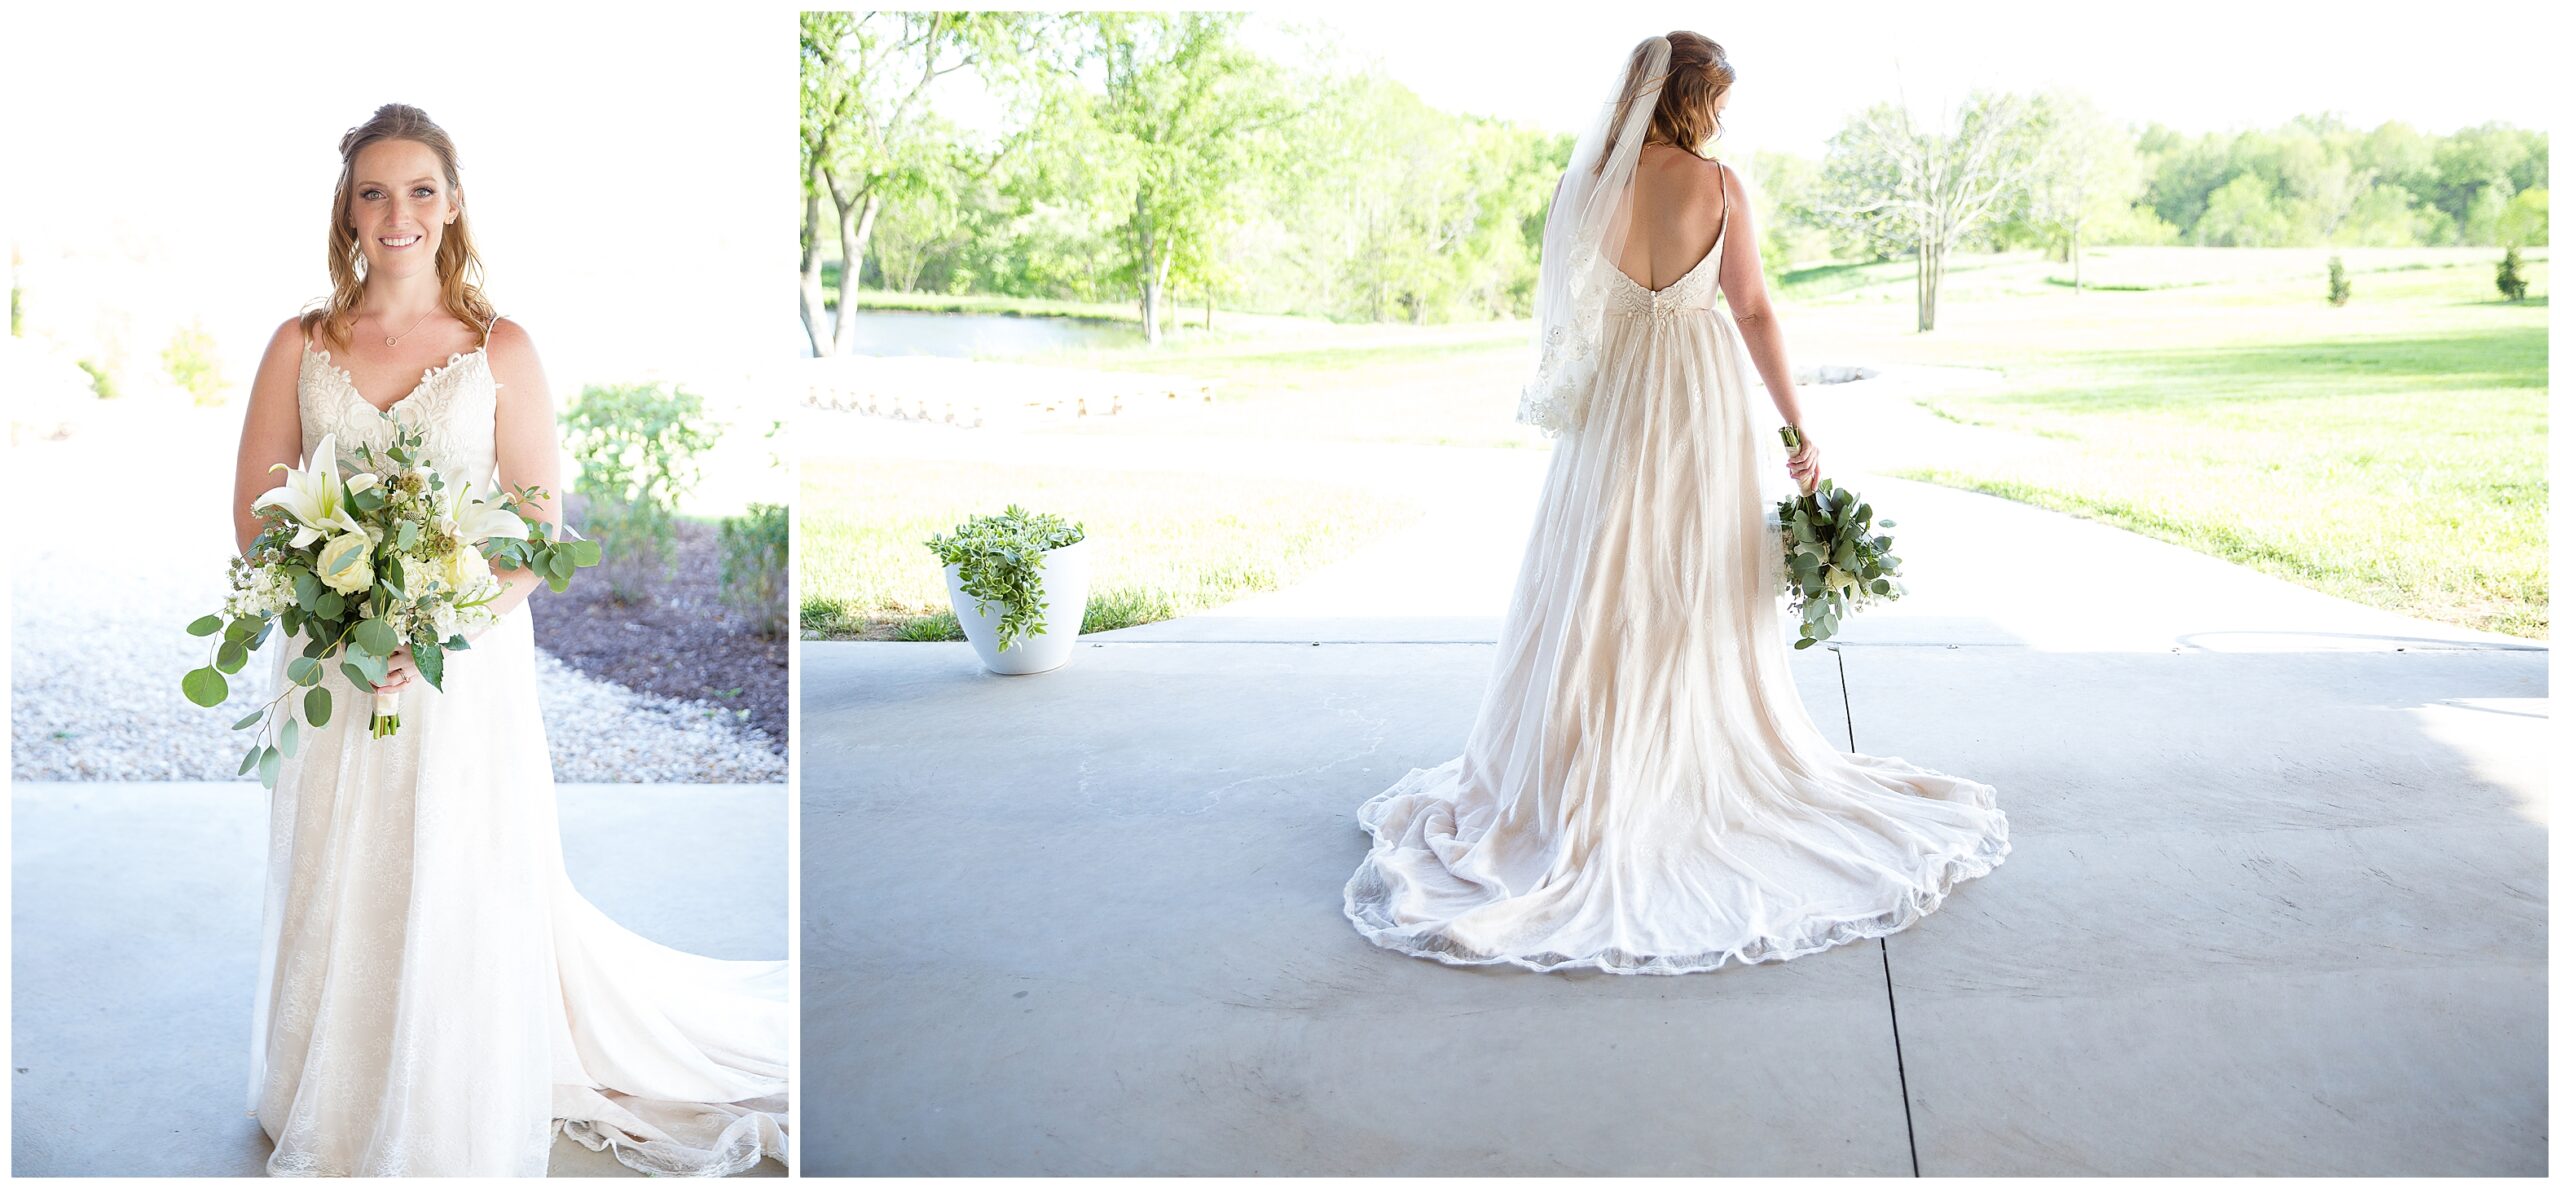 Bride portraits at Cooper's Ridge in Boonville Mo by Bella Faith photography 